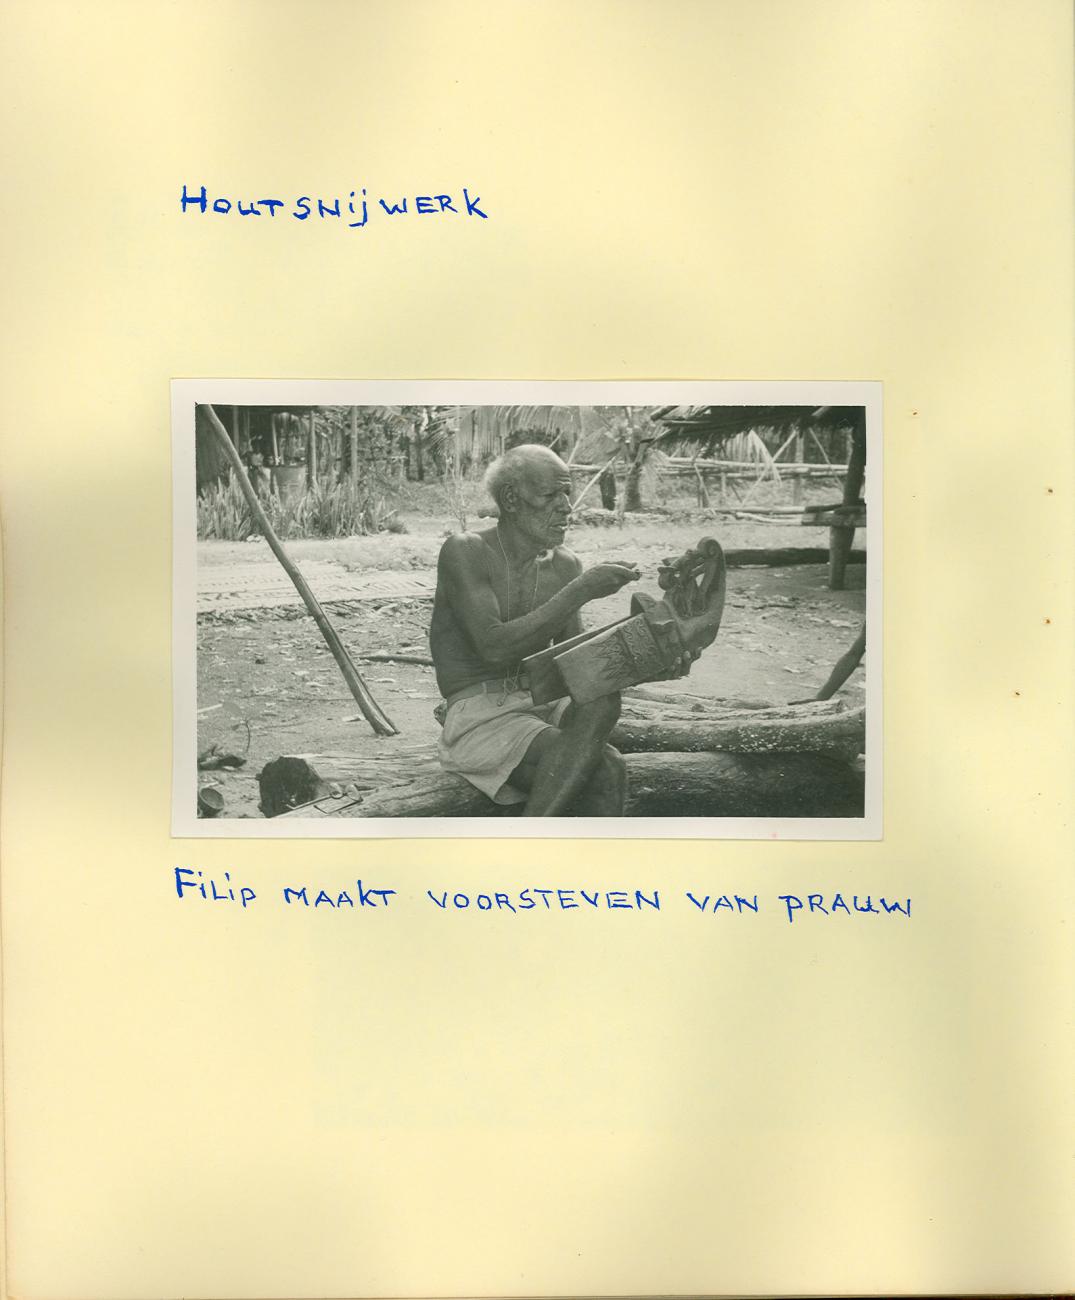 BD/83/56 - 
Papua man carving wood for the prow of a prau
